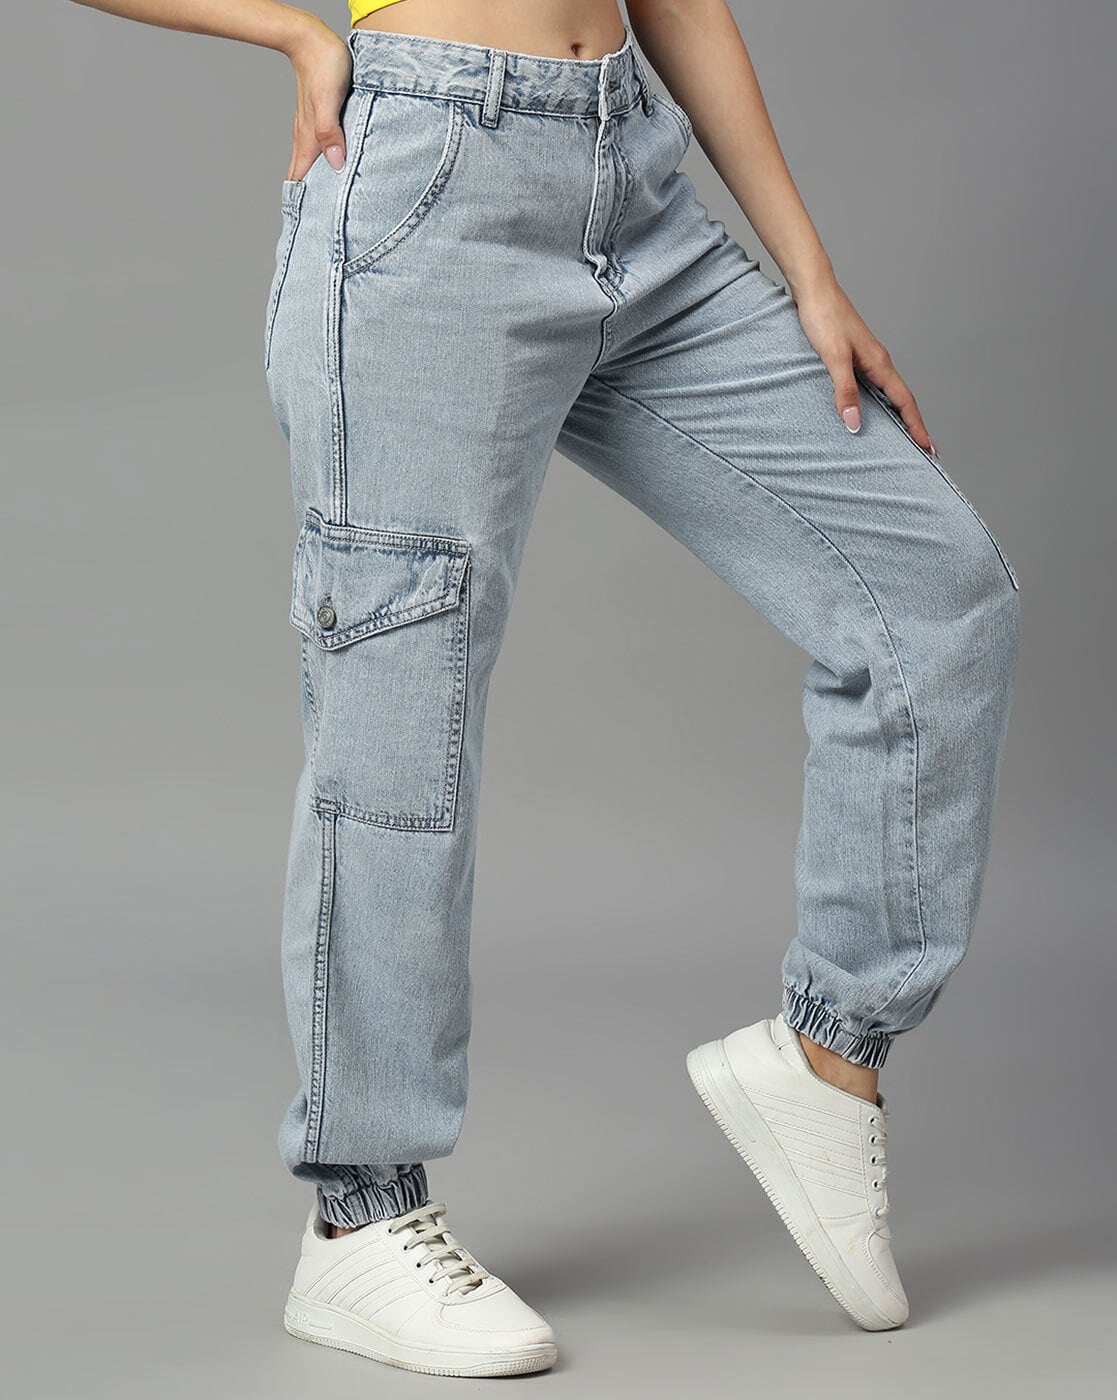 Womens Classic Denim Pants High Waist Slim Fit Elastic Ruched Full-Length  Bell Bottom Curvy Jeans at Amazon Women's Jeans store